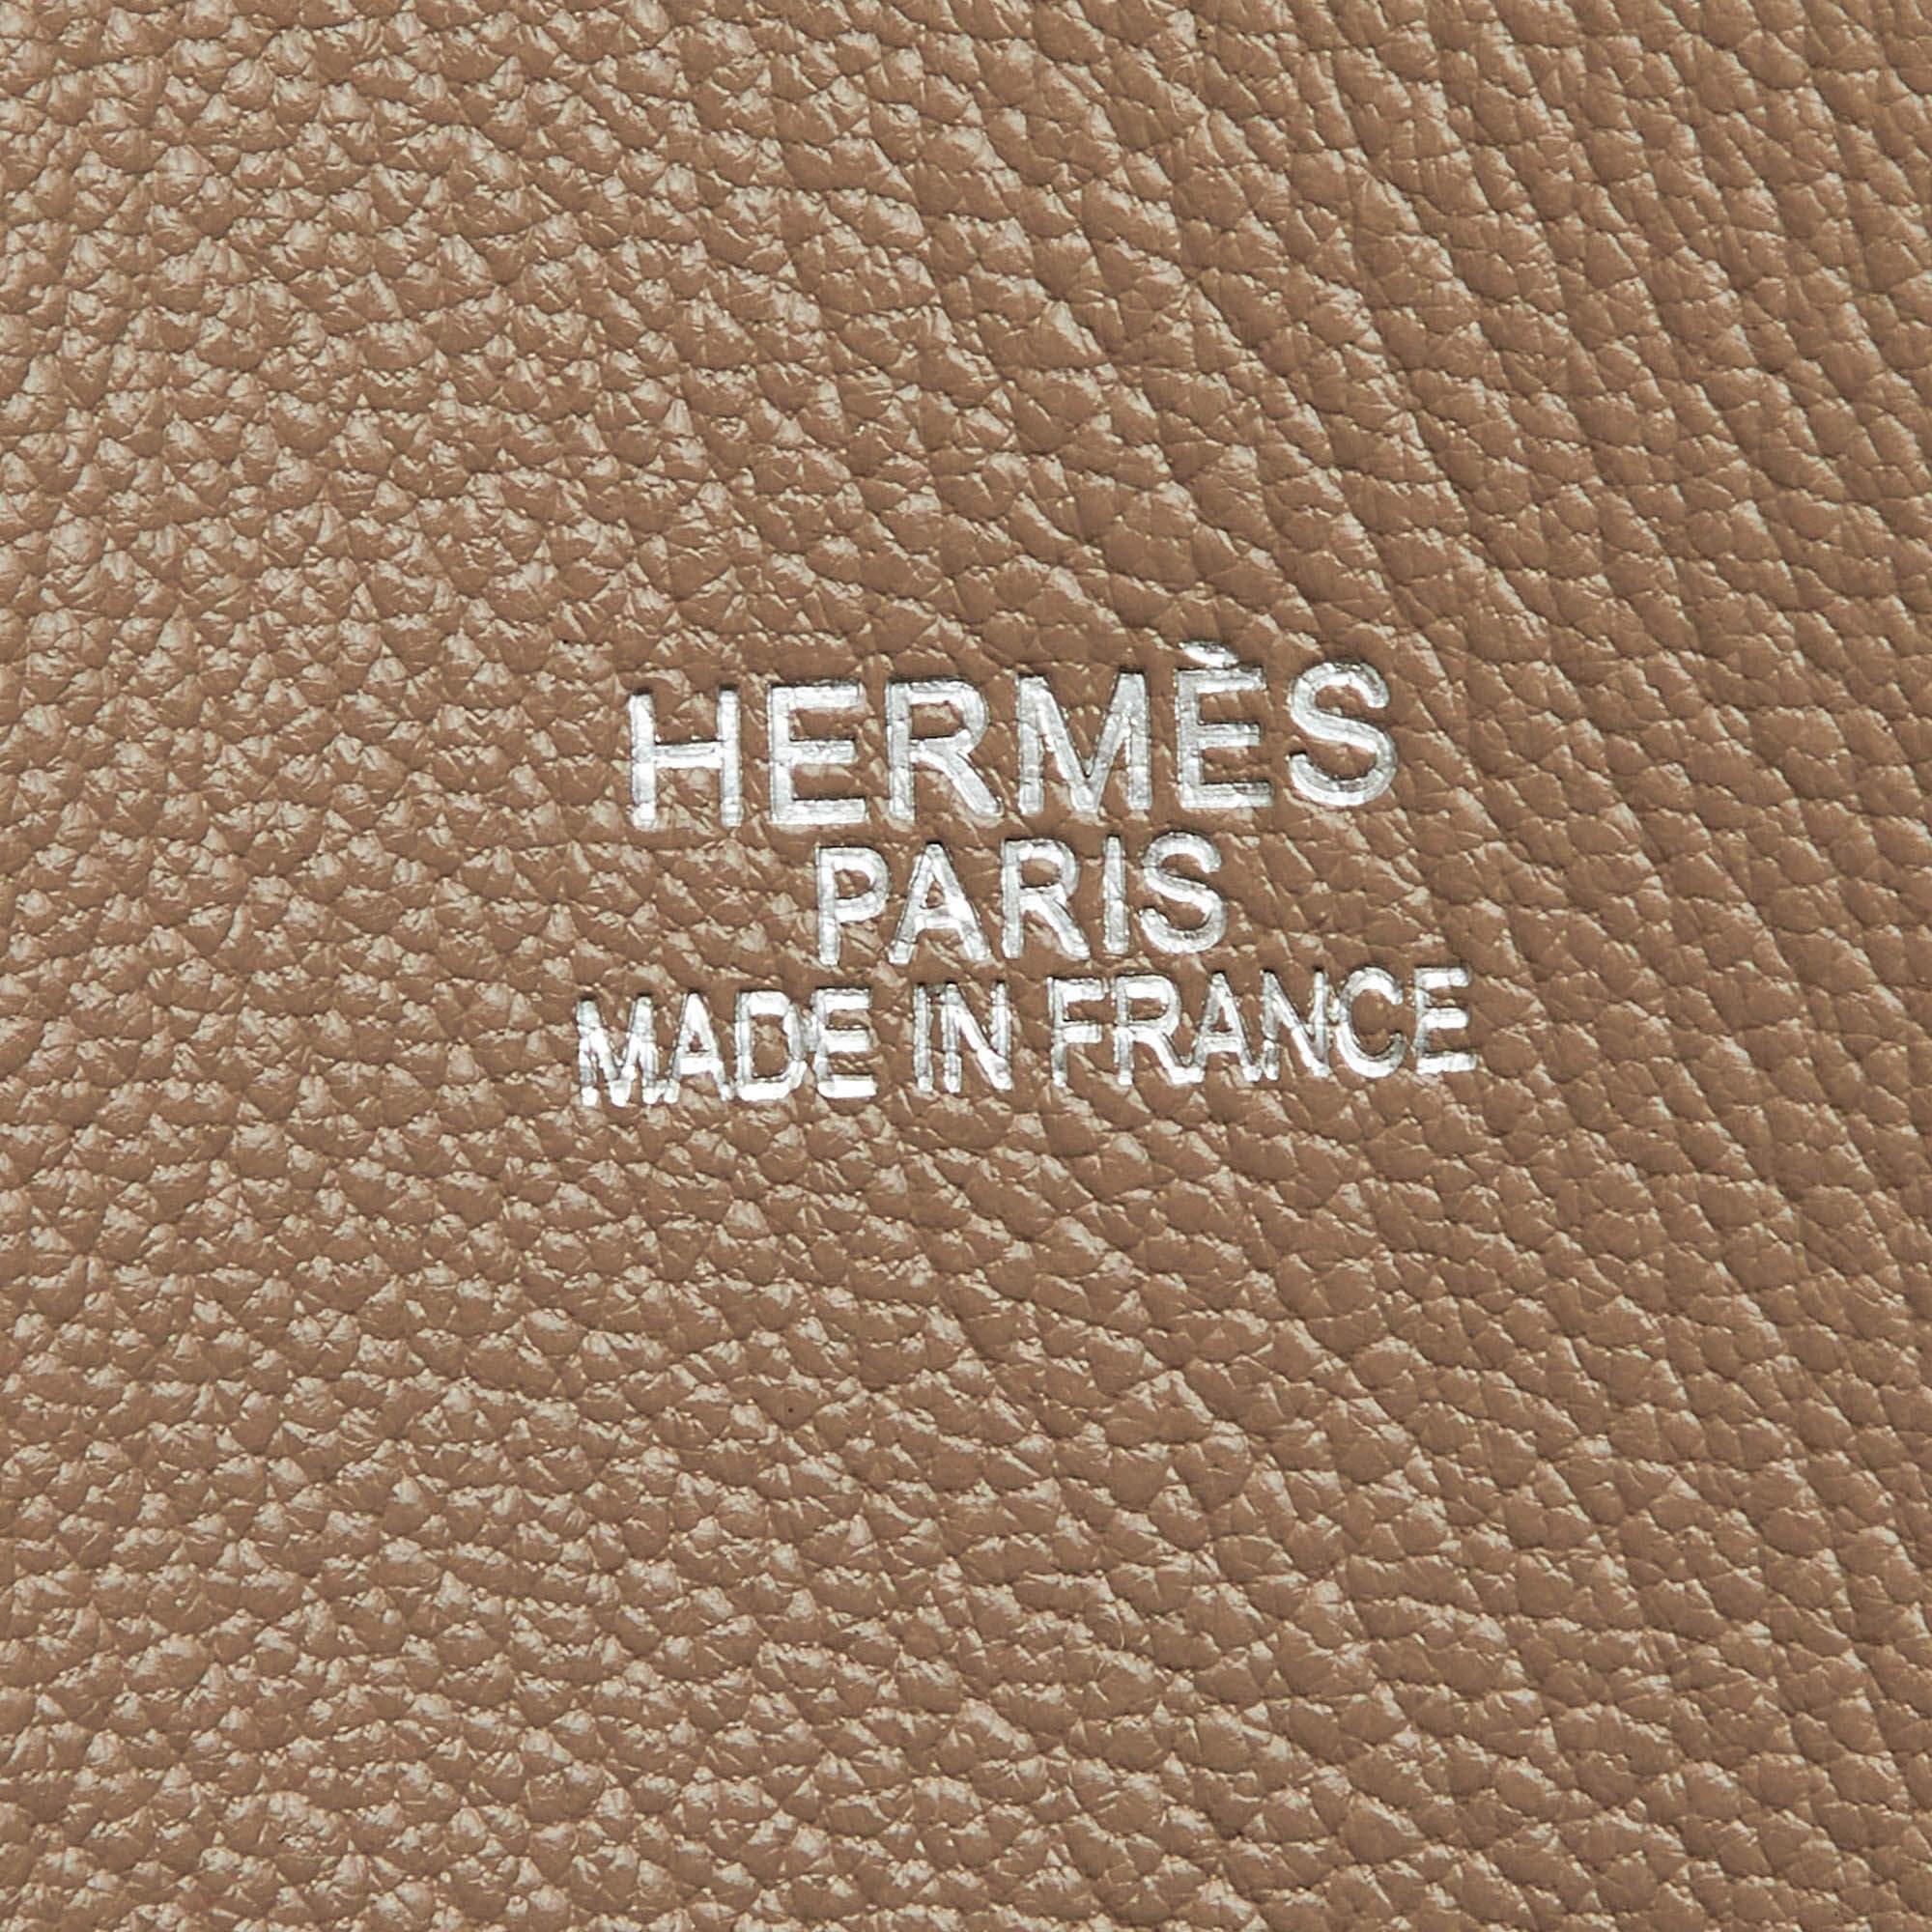 Women's Hermes Taupe Grey Taurillon Clemence Leather Palladium Finish Jypsiere 34 Bag For Sale